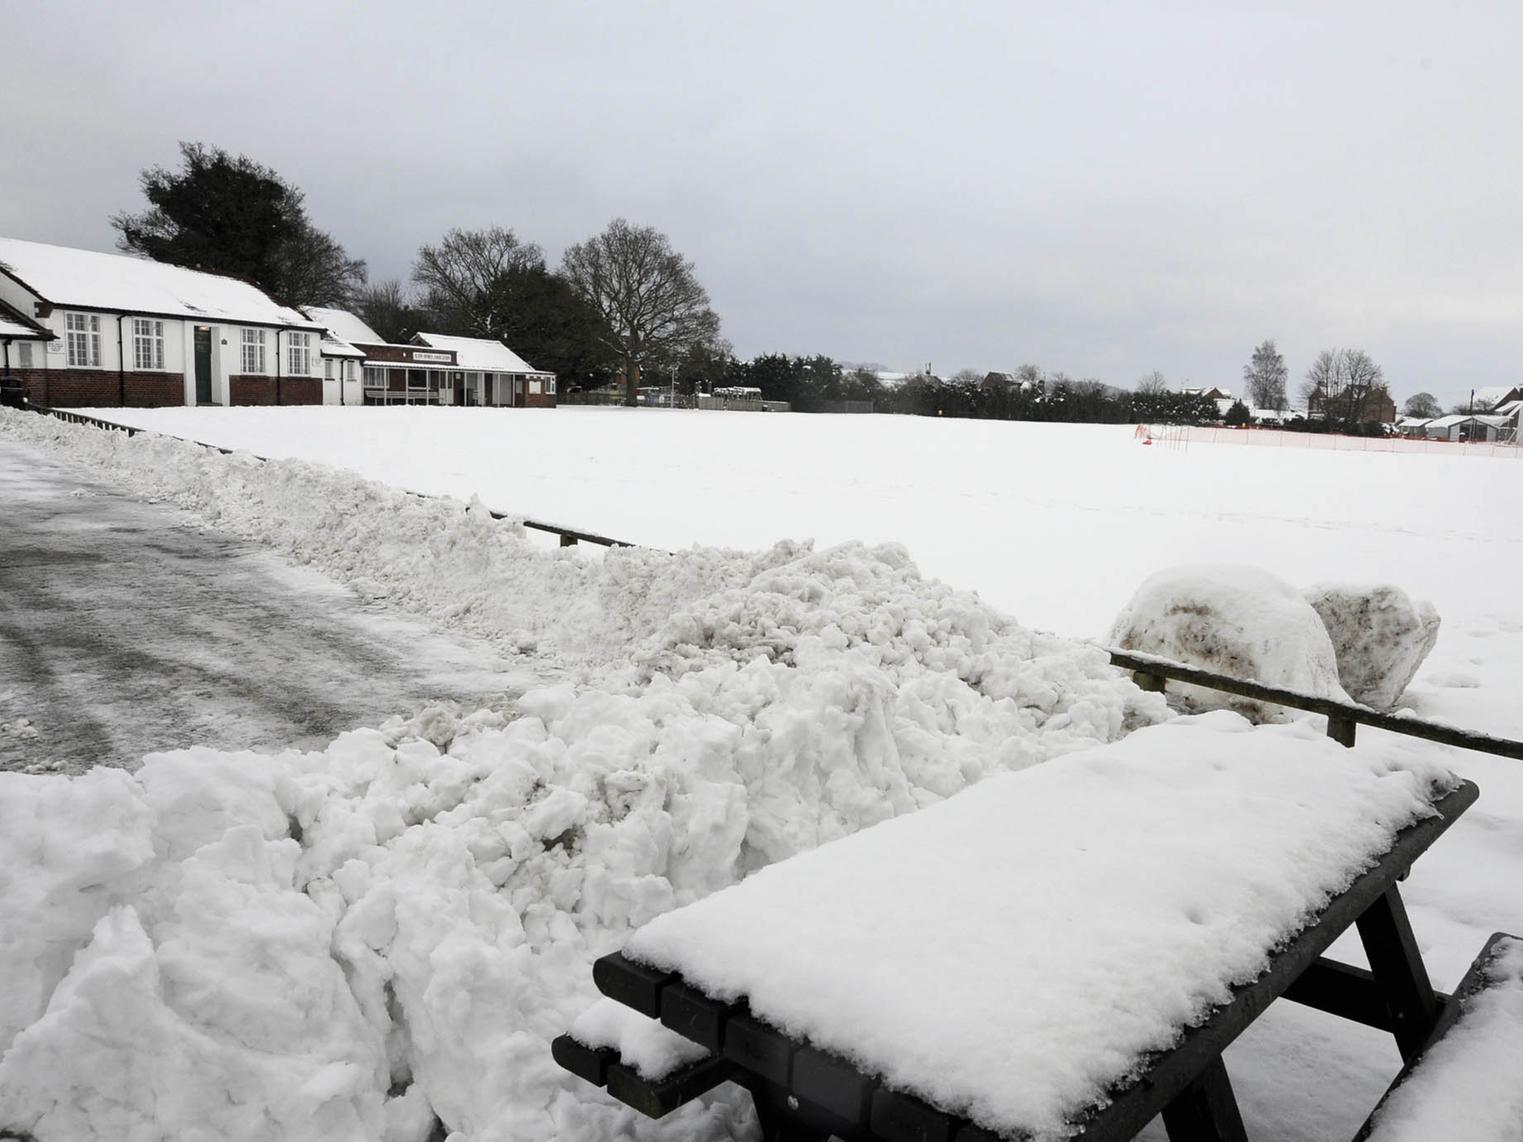 It was snow balls rather than sports balls at Ayton Sports Club in 2013.